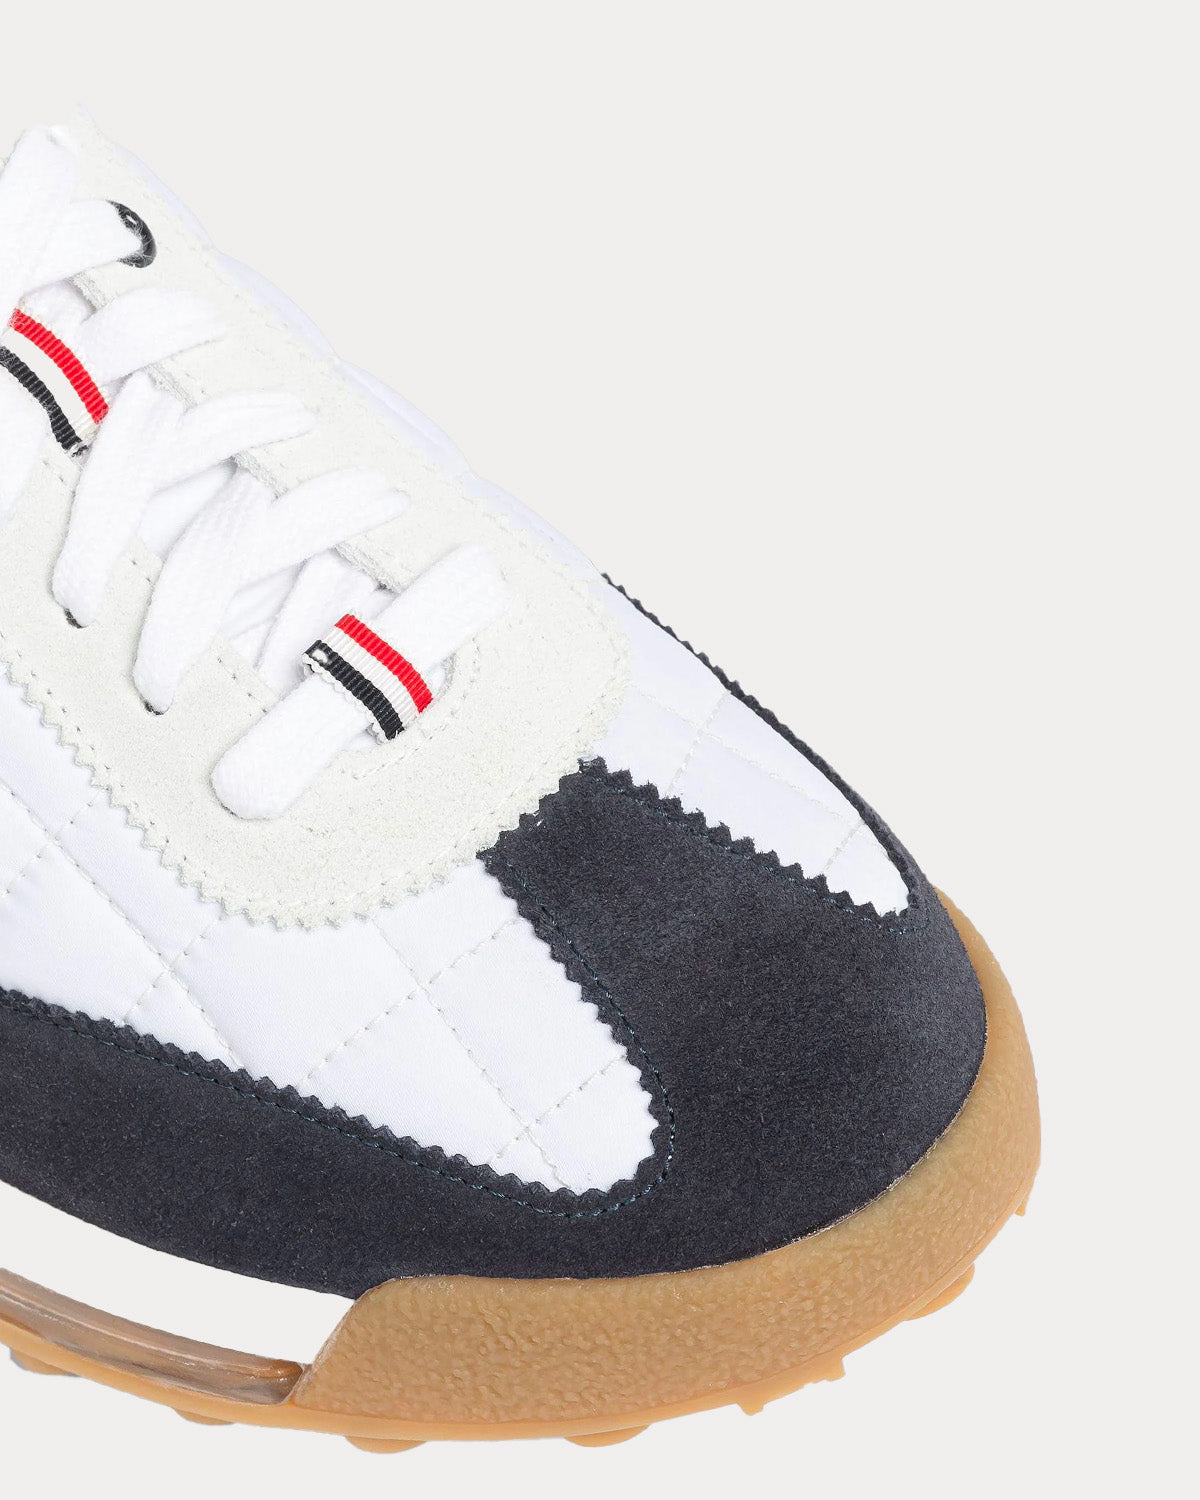 Thom Browne - Tech Runner Clear Sole Quilted Navy / White Low Top Sneakers